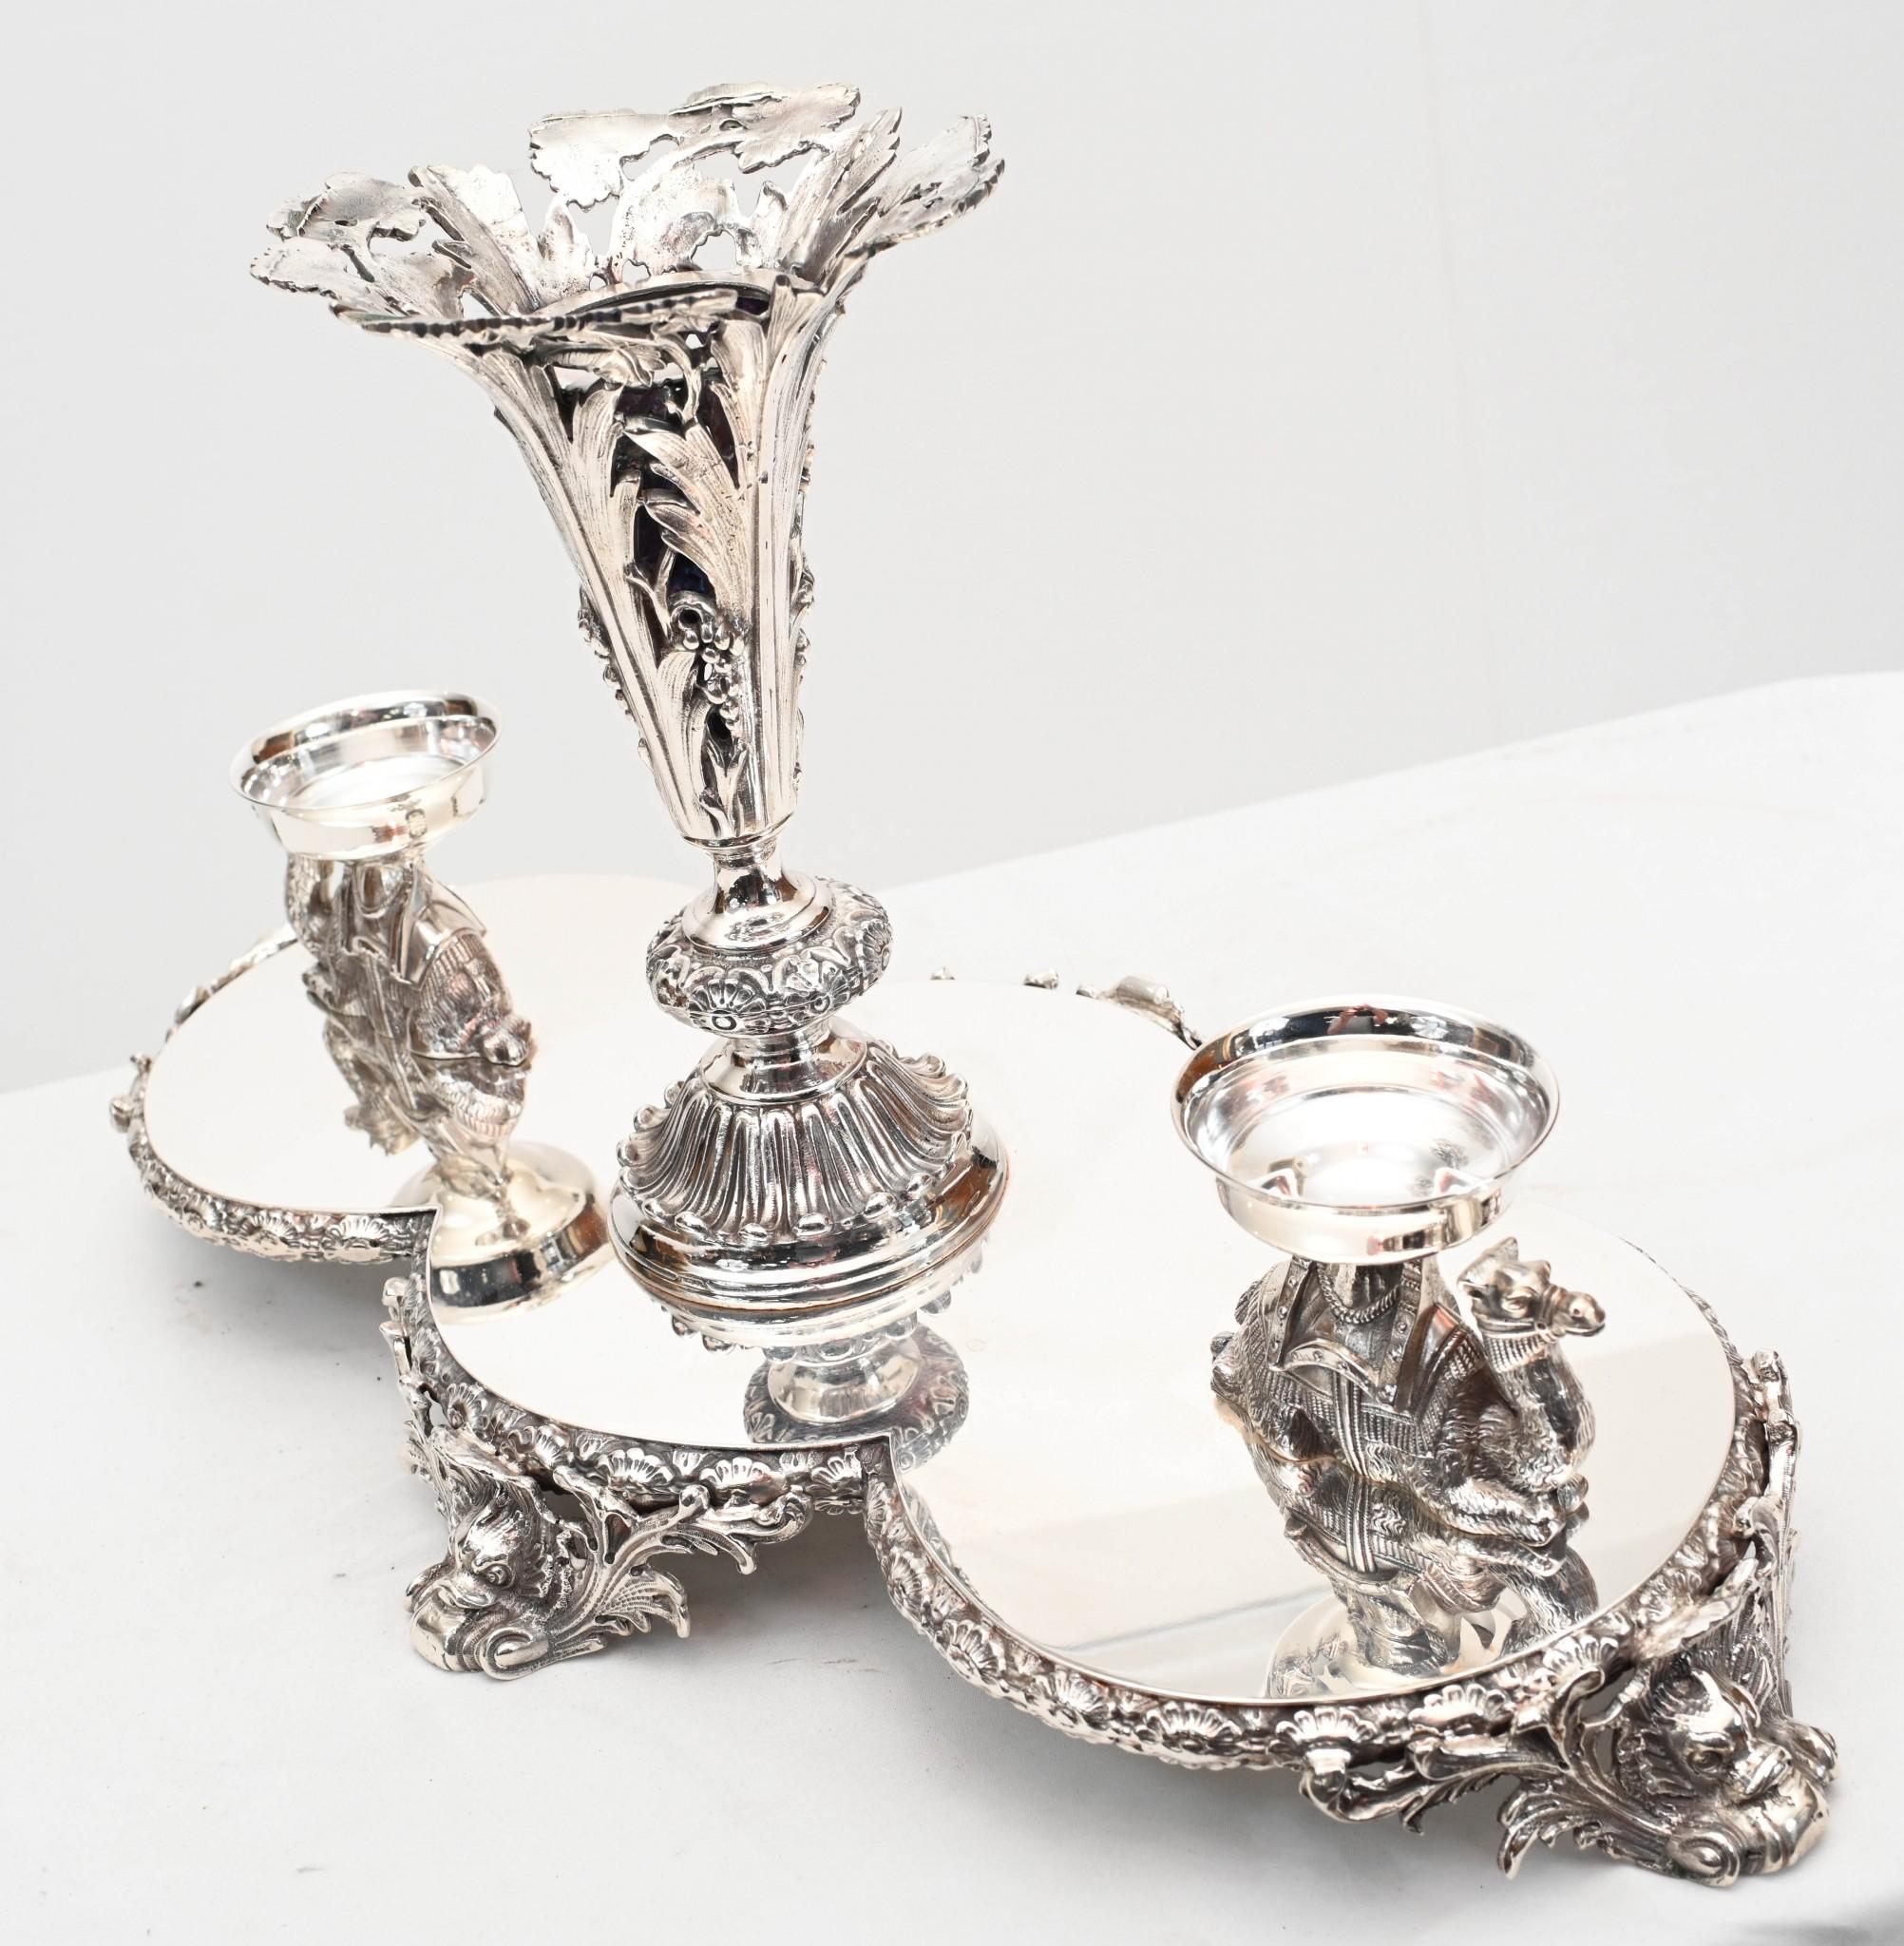 Stunning and unsual pair of Sheffield silver plate epergnes or centrepieces
Main centrepiece flanked by two smaller bowls to either side
Perhaps one of the main eye catching features are the camel supports, delightful
Patina to the silver plate is